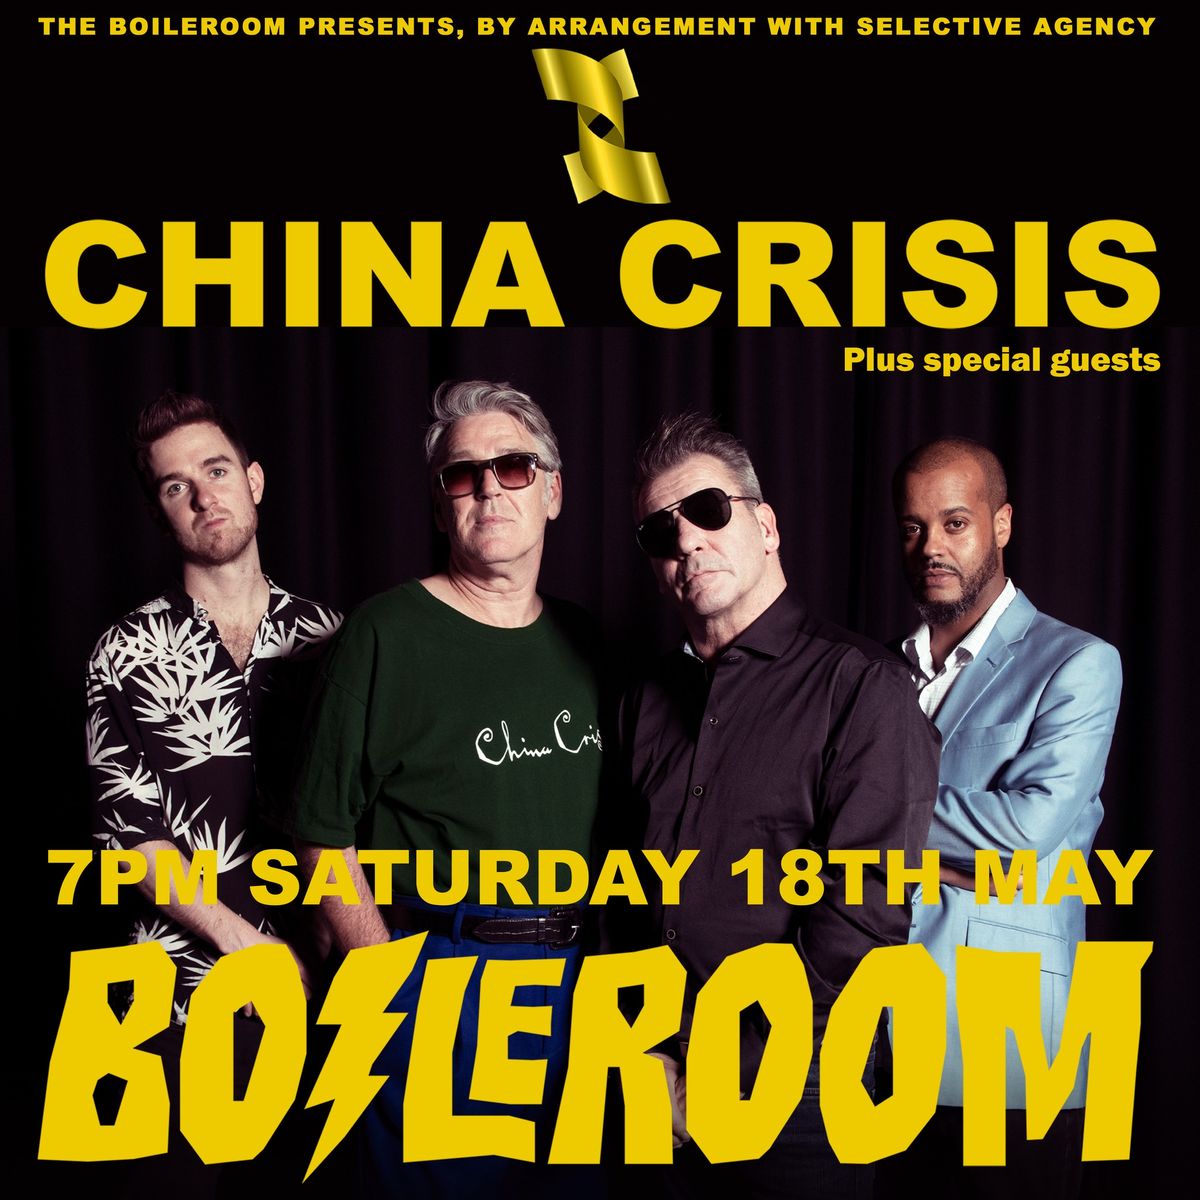 China Crisis - The Boileroom, Guildford